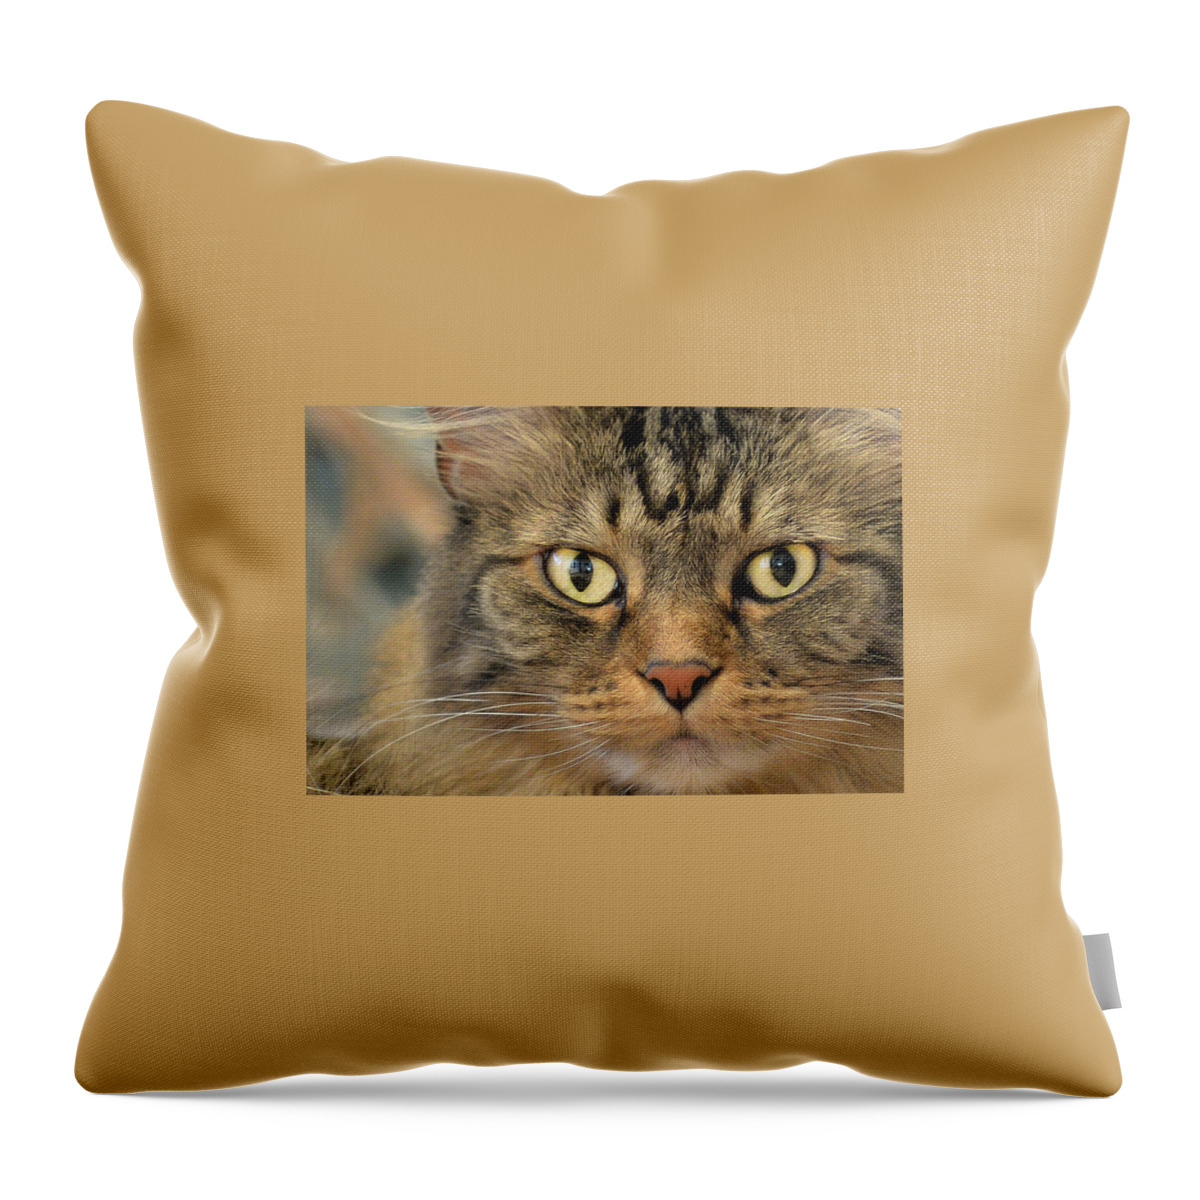 Kitty Throw Pillow featuring the photograph On The Prowl by Jennifer Grossnickle